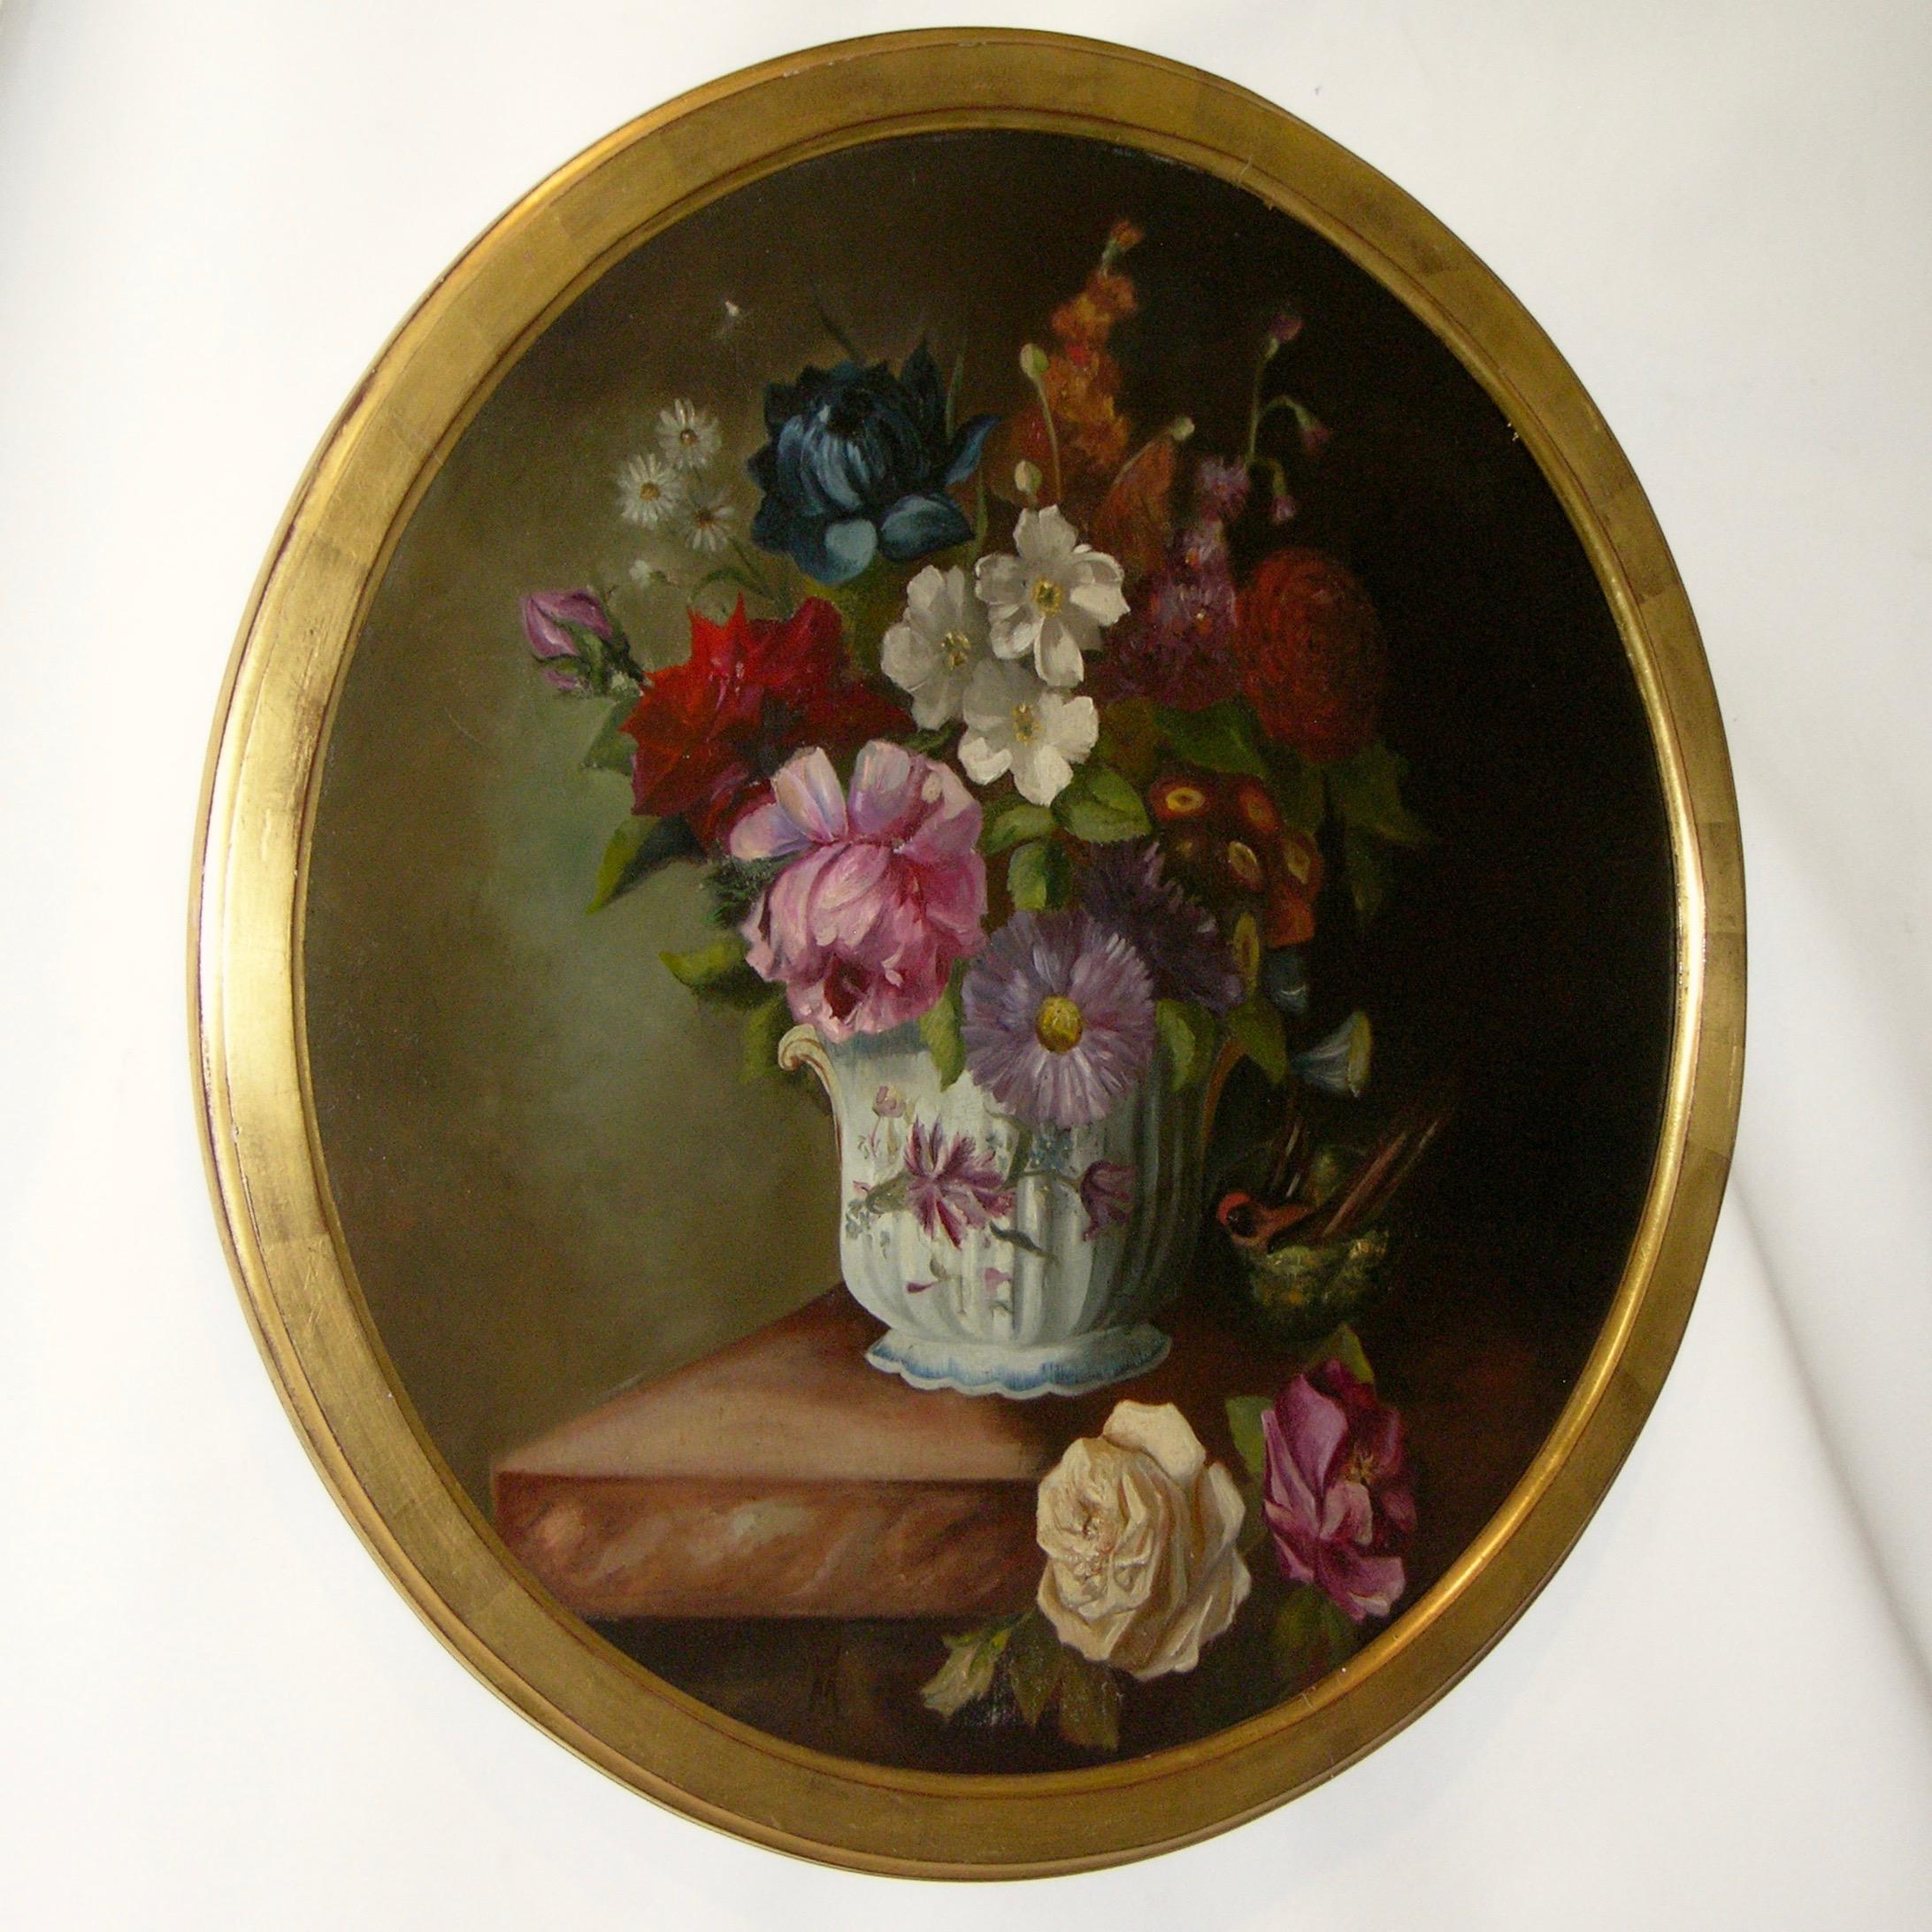 Canvas 1880 French Provincial Pair of Round Still Life Oil Paintings in Gilt Frames